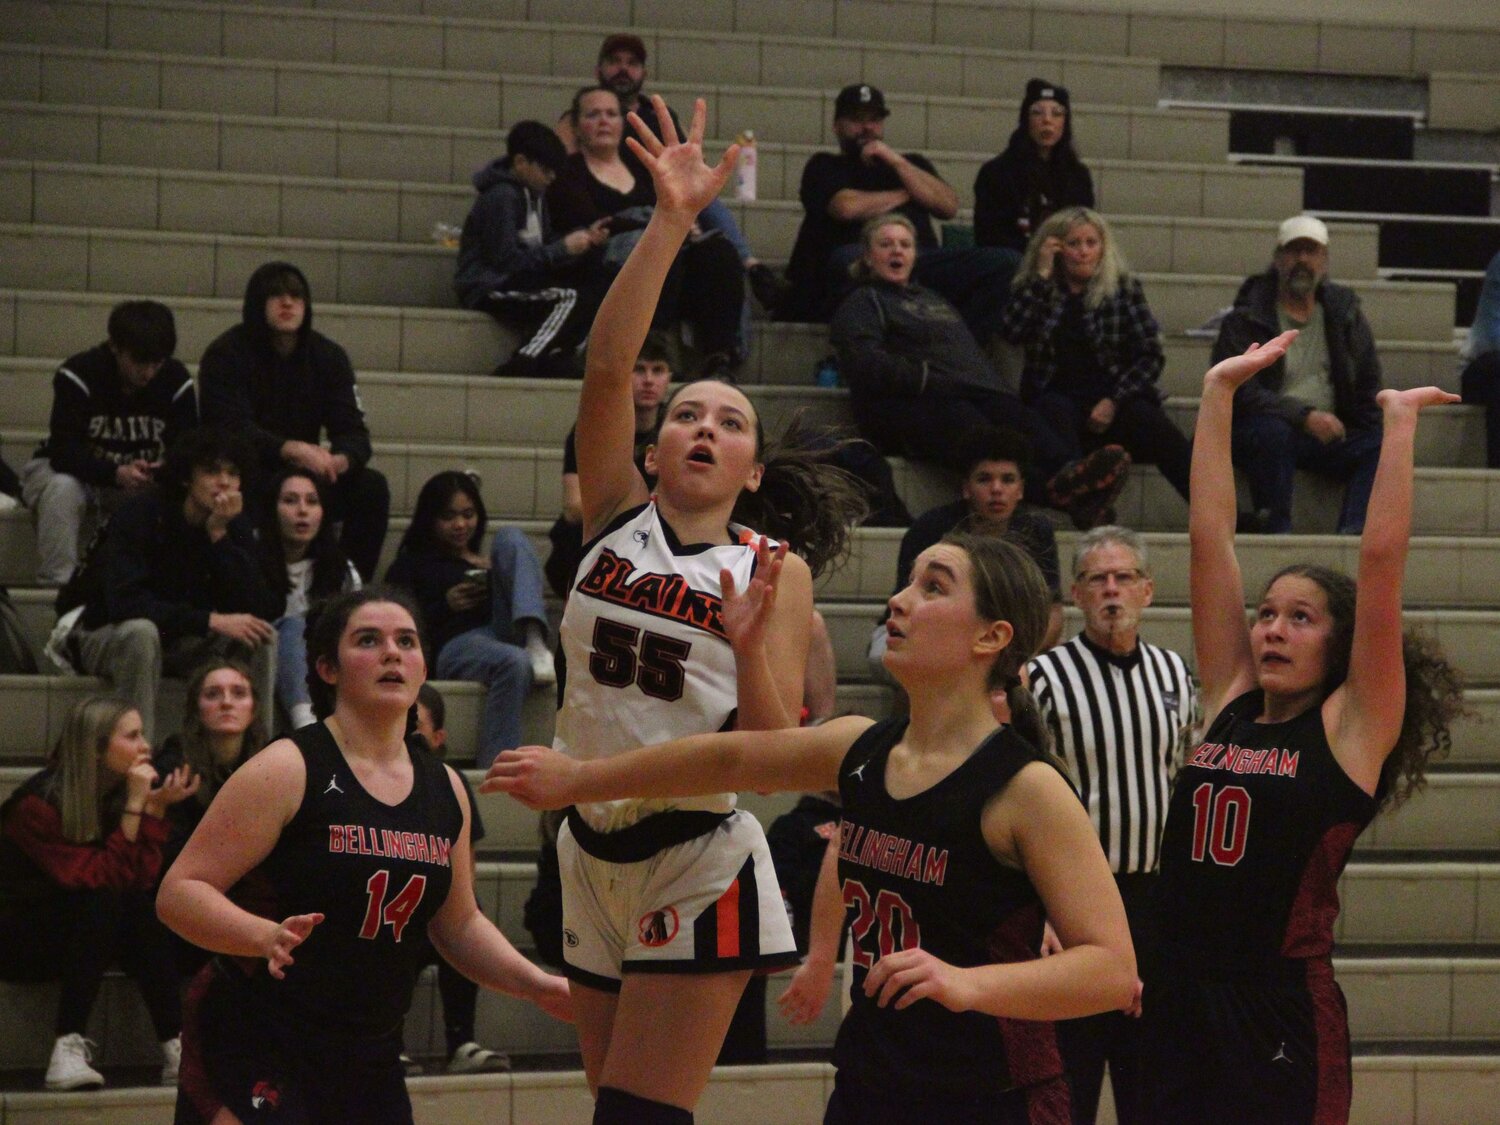 Freshman Teia Dube shoots a floater surrounded by three Bellingham defenders in the third quarter of Blaine’s 53-30 win over Bellingham on December 5.